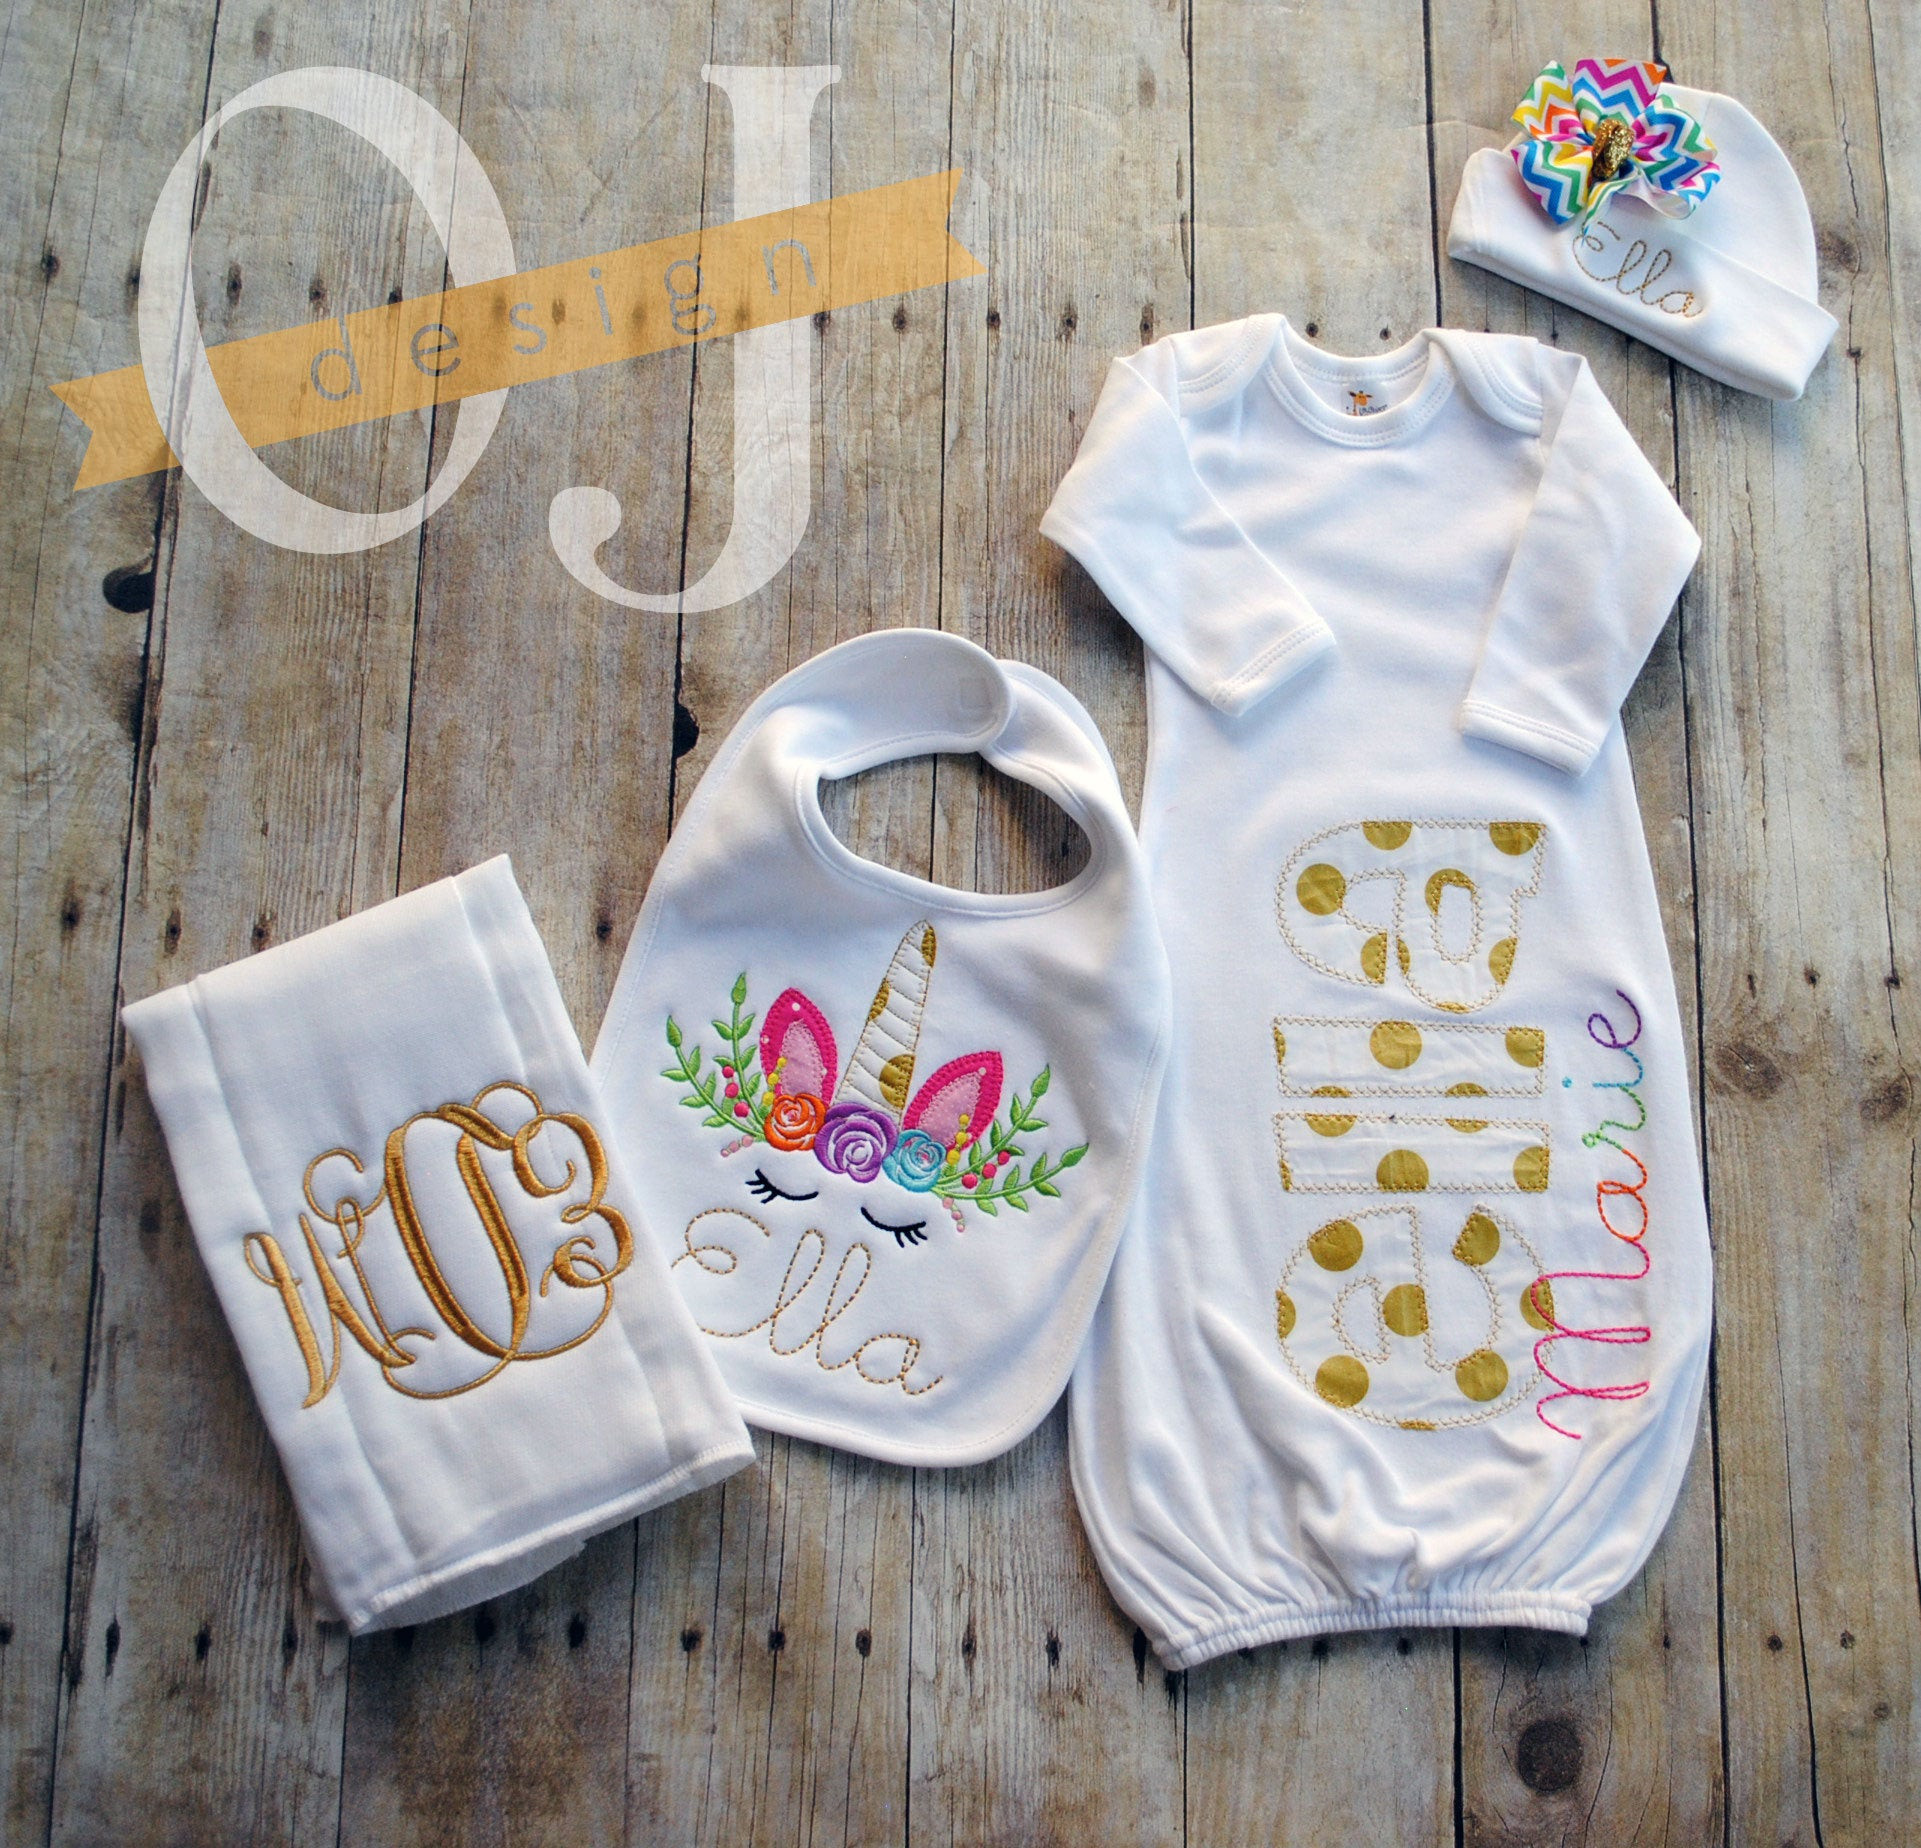 Personalized Baby Gift Etsy
 Personalized Baby Girl Gift Set Newborn Gift Set Gown